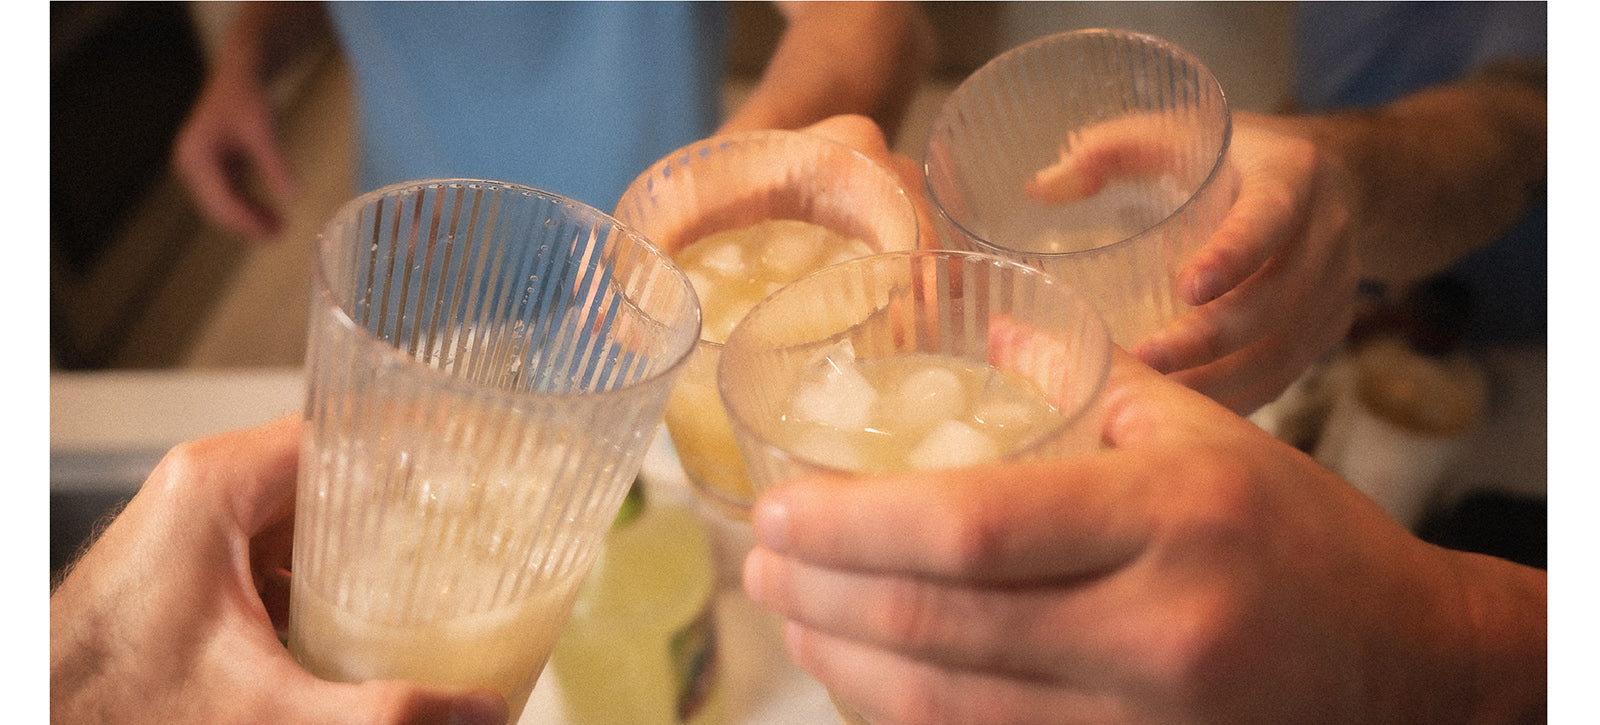 four people tapping margarita glasses together for cheers